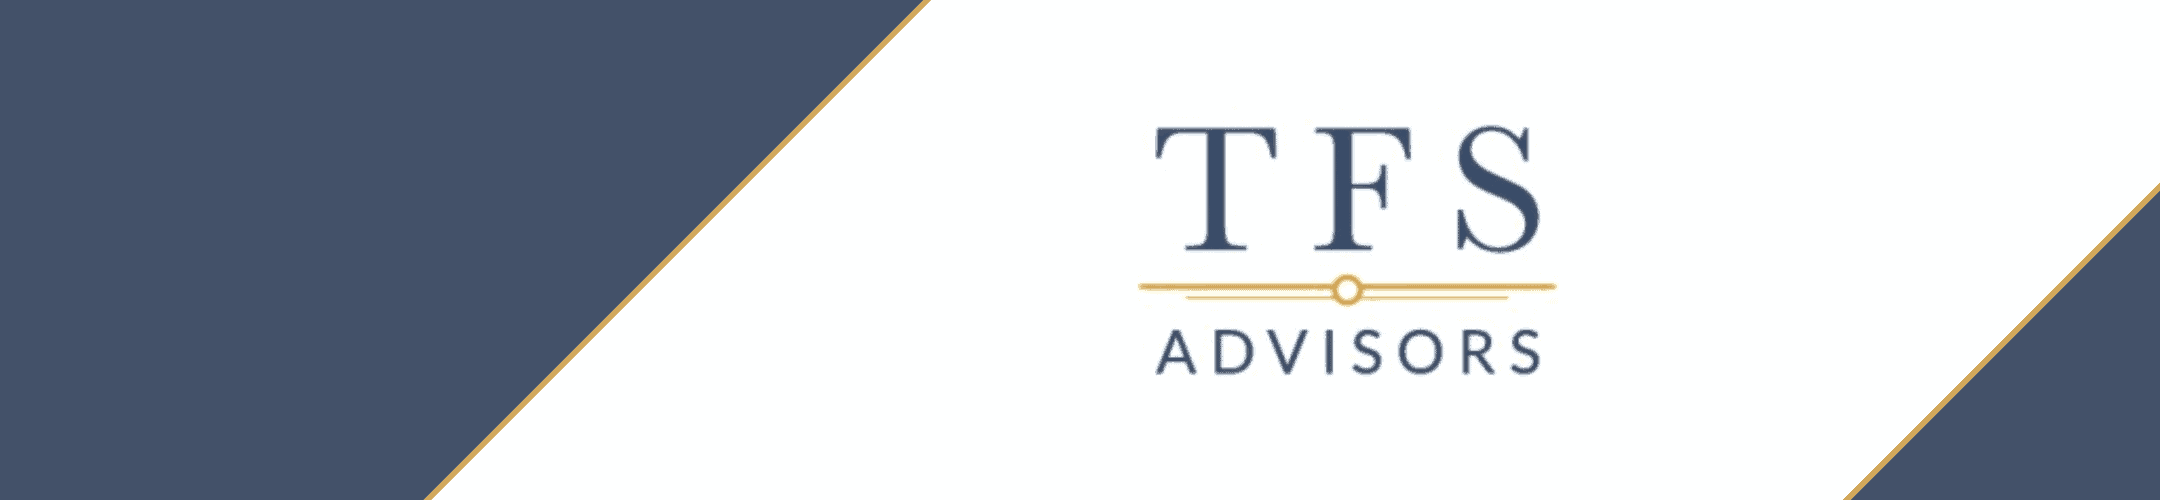 Elegant and professional: tfs advisors' branded graphic with a sophisticated navy and cream color scheme.